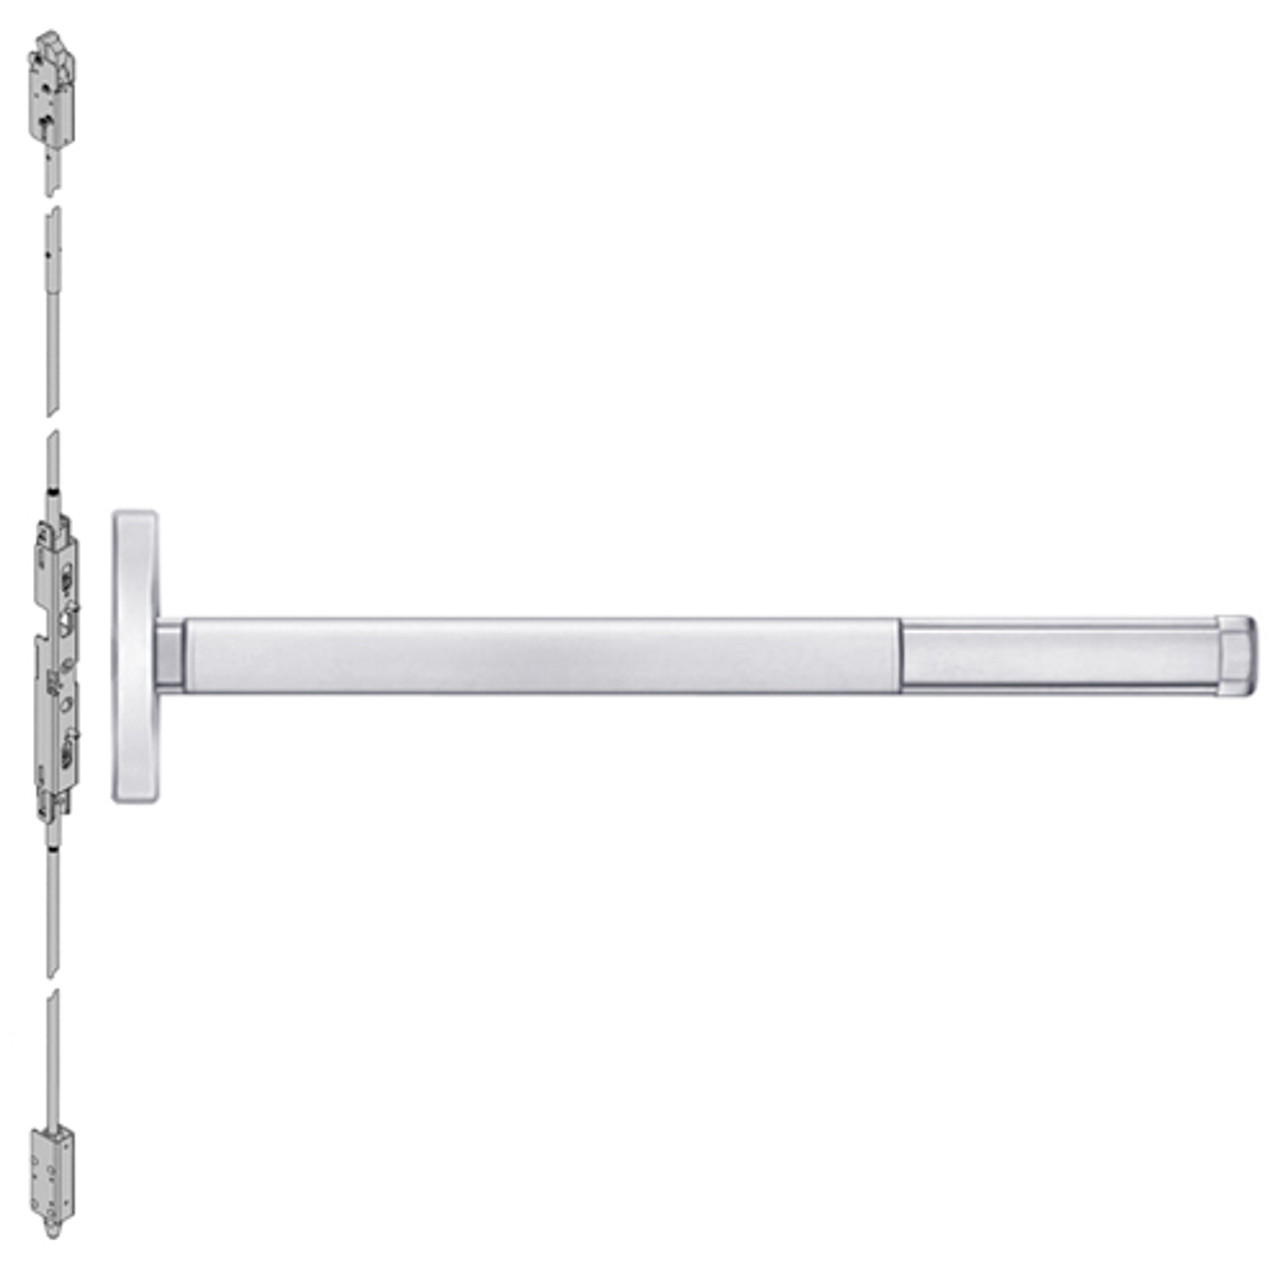 ELRFL2603LBR-625-36 PHI 2600 Series Fire Rated Concealed Vertical Rod Exit Device with Electric Latch Retraction Prepped for Key Retracts Latchbolt in Bright Chrome Finish